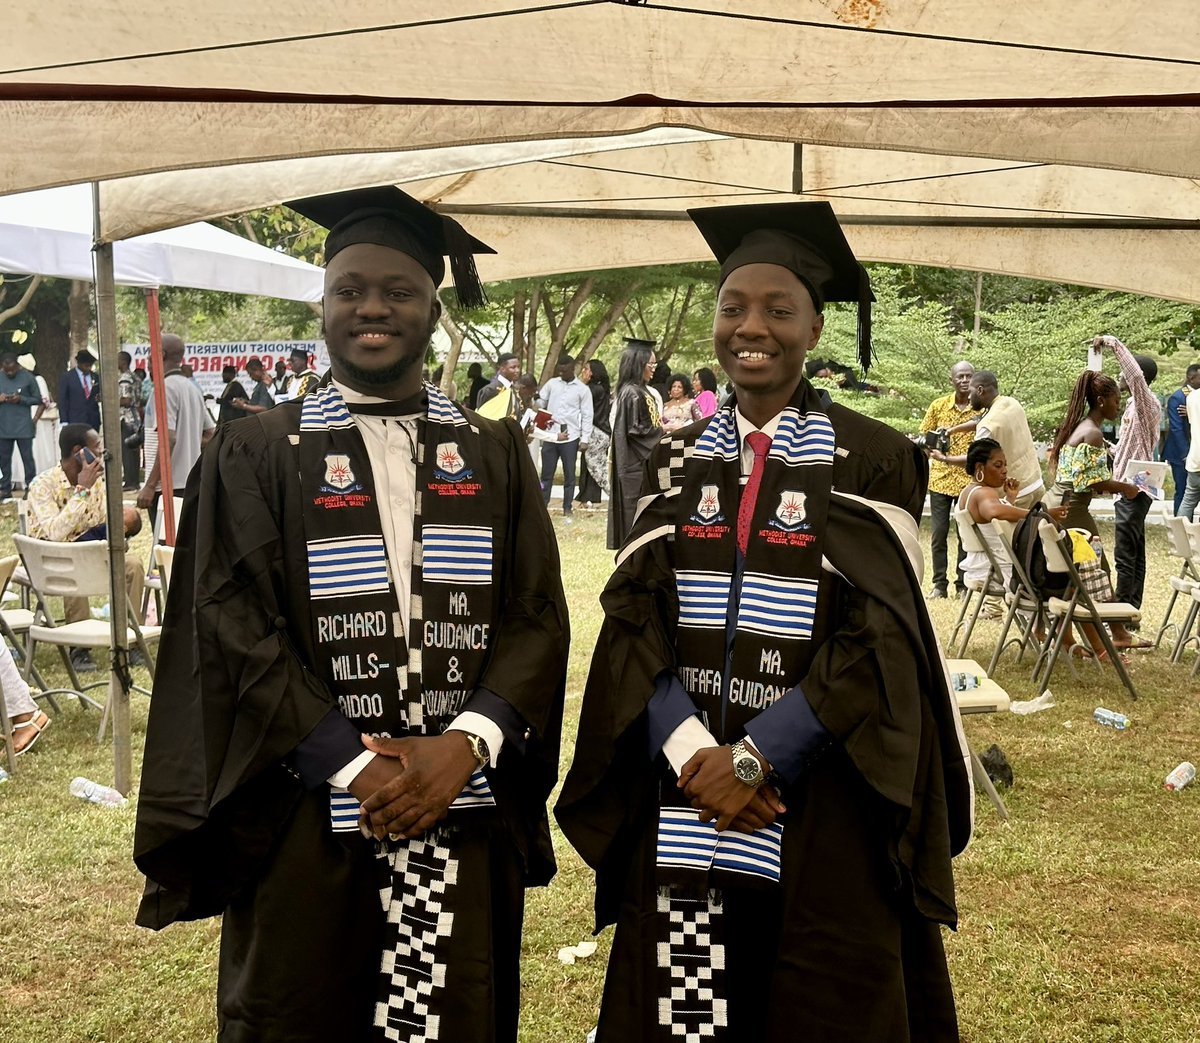 🎓 Today, we are celebrating Nutifafa & Richard's MSc Graduation! From Zomujo Peer Counsellors to MSc in Guidance and Counselling at Methodist University College—no prior psych background, just pure dedication! 🚀 #Zomujo #MentalHealth #Graduation #CommunityImpact 🎉